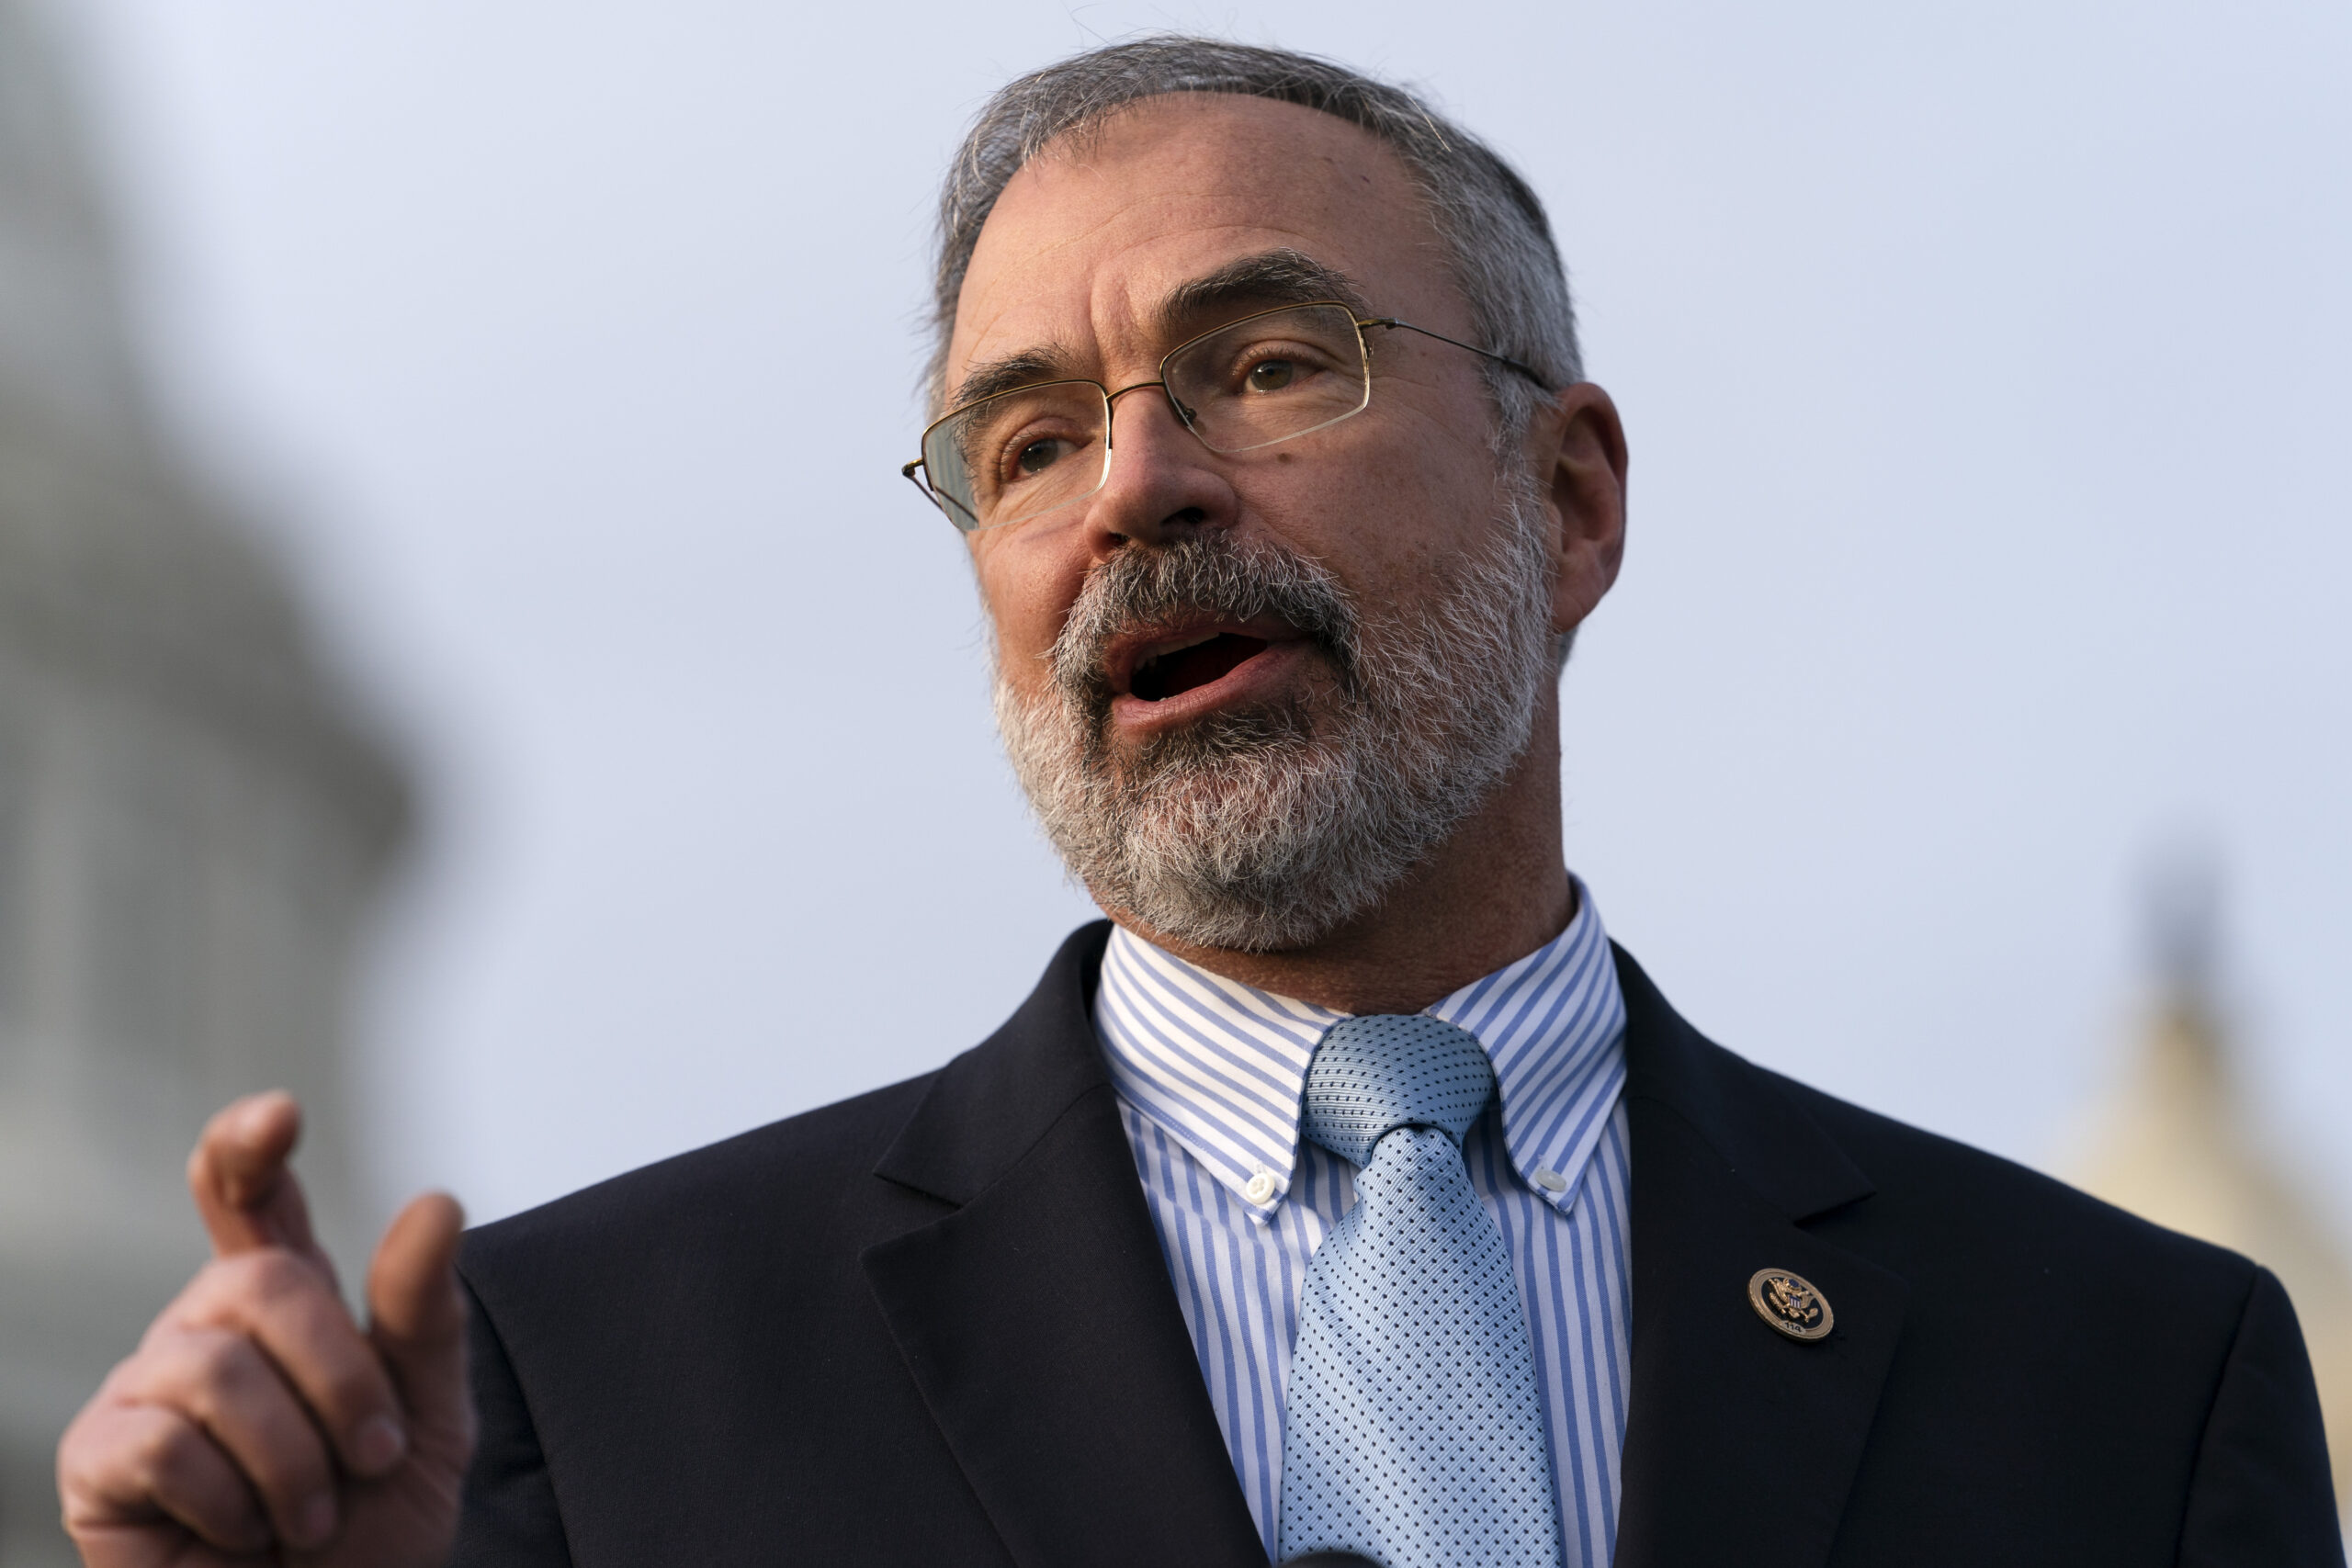 Rep. Andy Harris, R-Md., speaks during a news conference with members of the conservative Freedom Caucus, on Capitol Hill, Thursday, Dec. 3, 2020, in Washington. (AP Photo/Jacquelyn Martin)